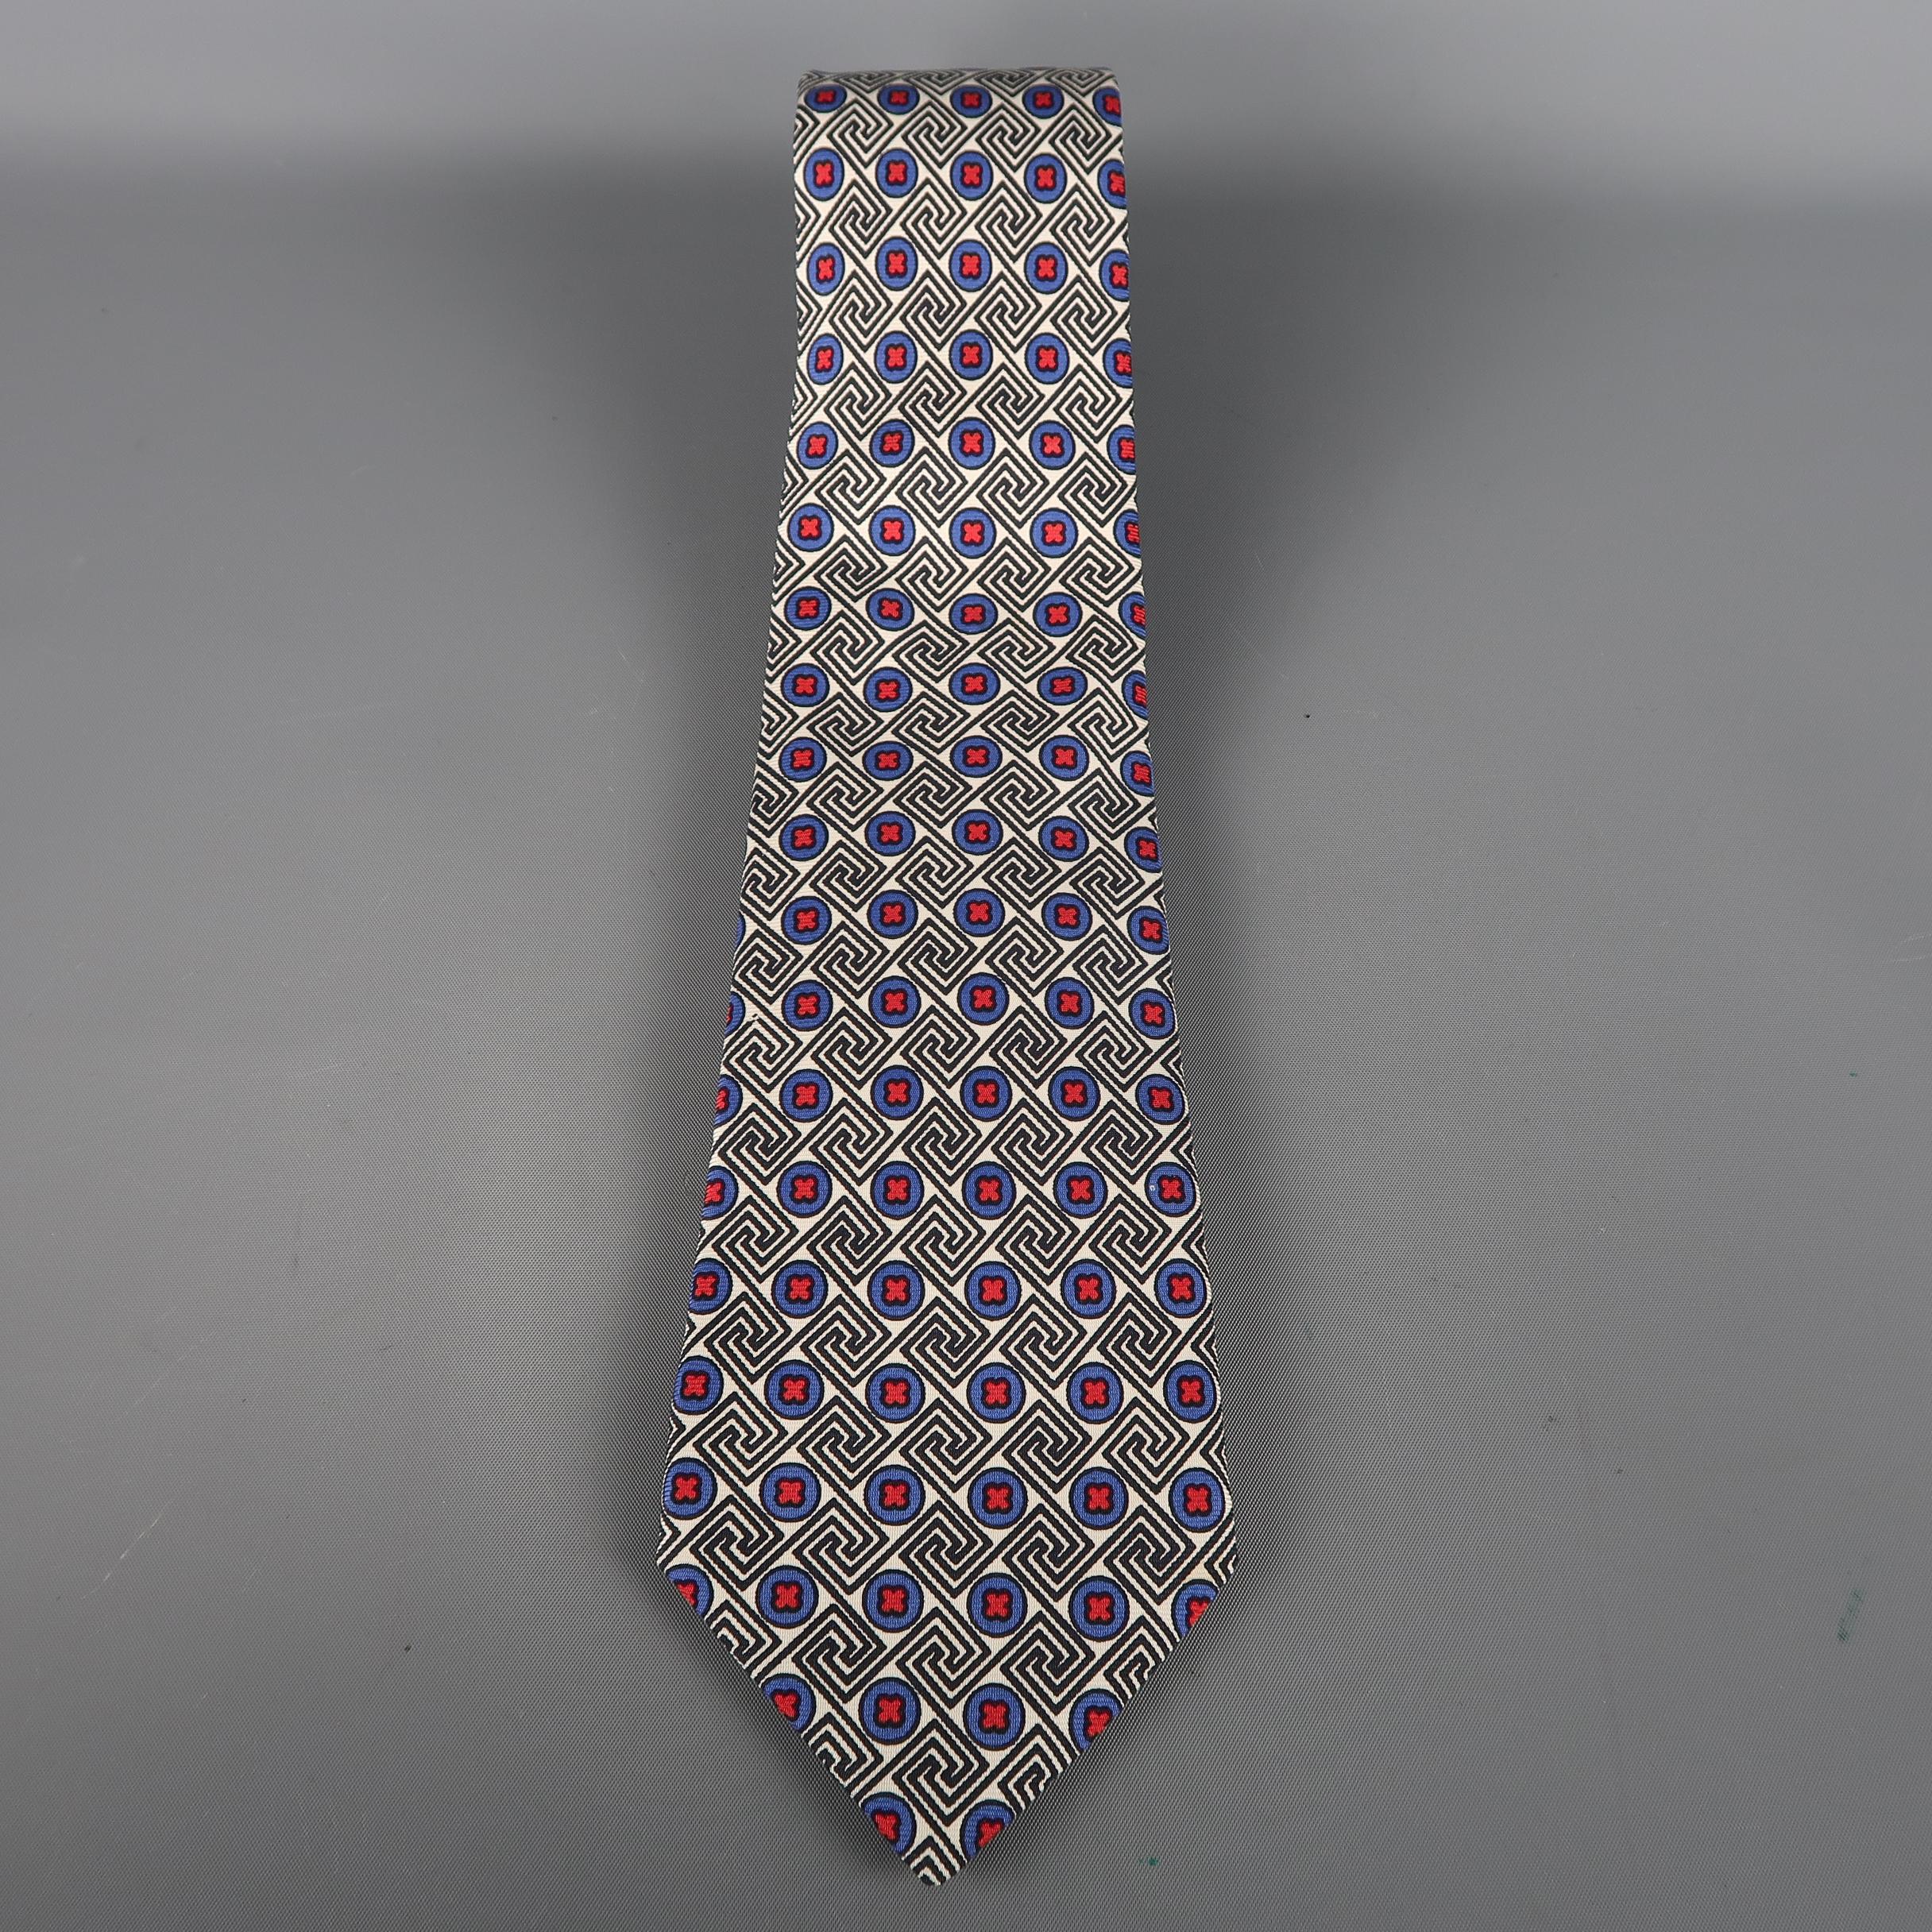 KITON  tie come in white, blue and  black silk  with an all over red crosses print. Made in Italy.
 
Excellent Pre-Owned Condition.
 
Width: 3.5 in.